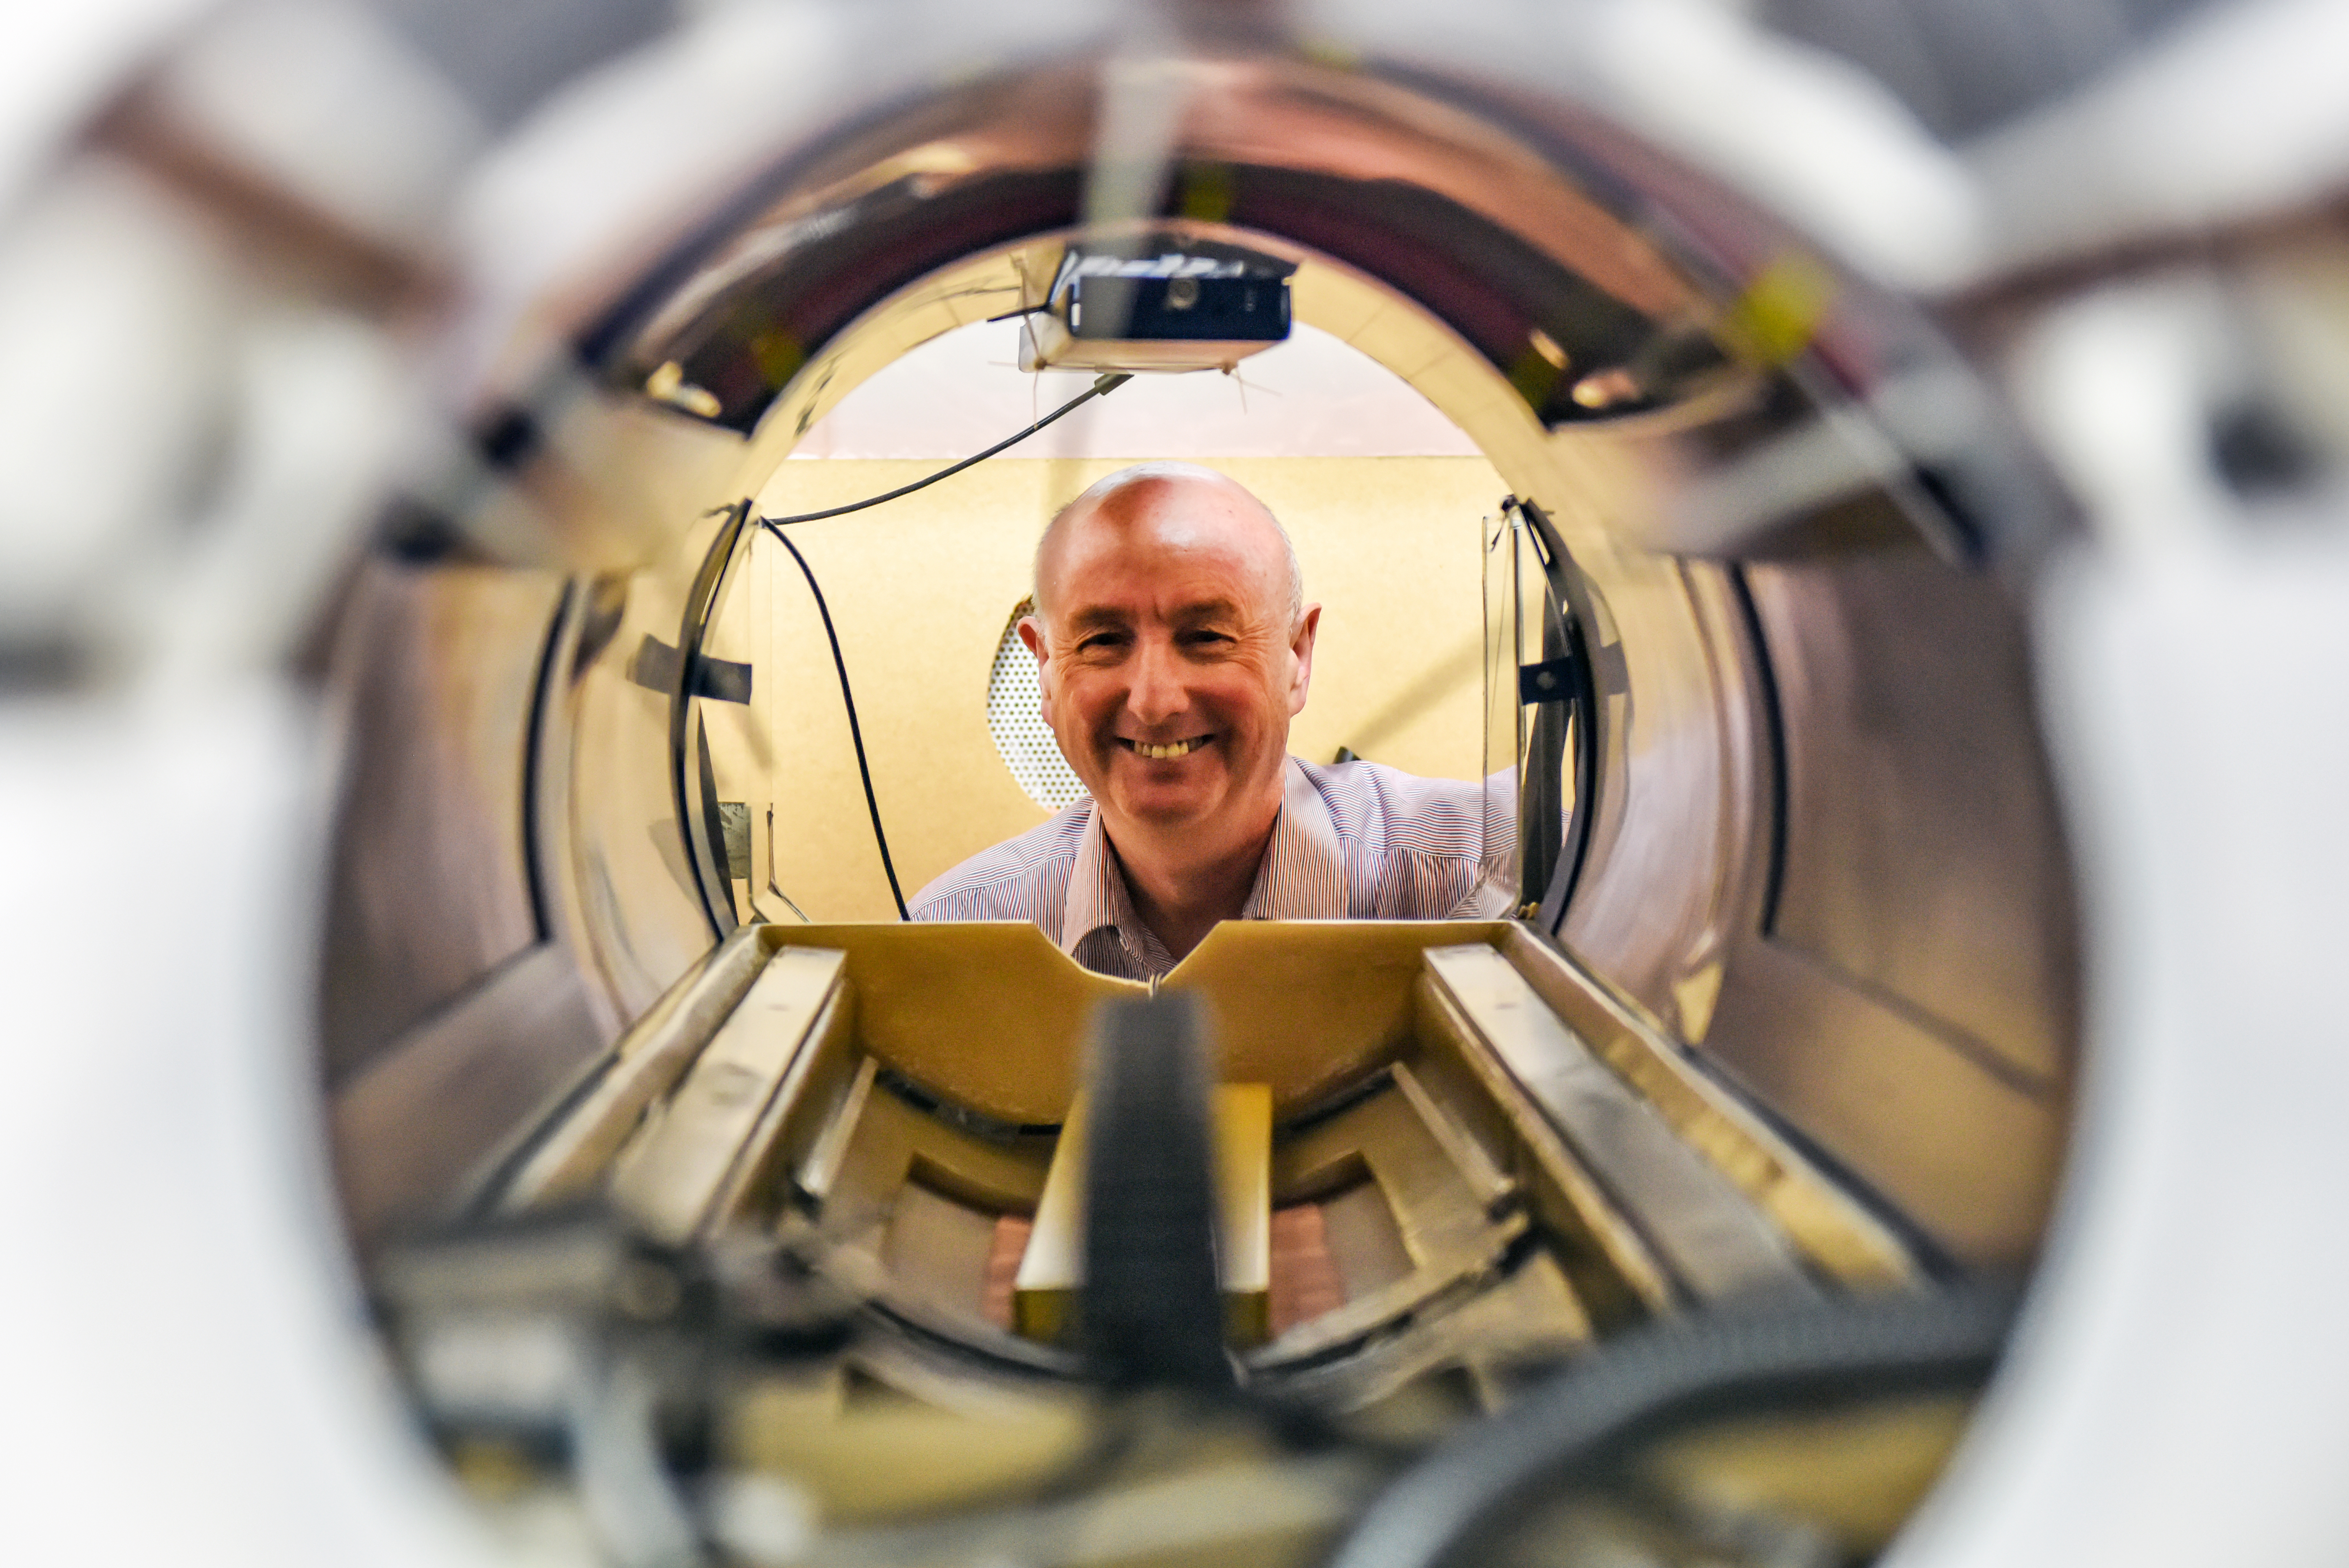 Professor David Lurie with the new FFC-MRI scanner.